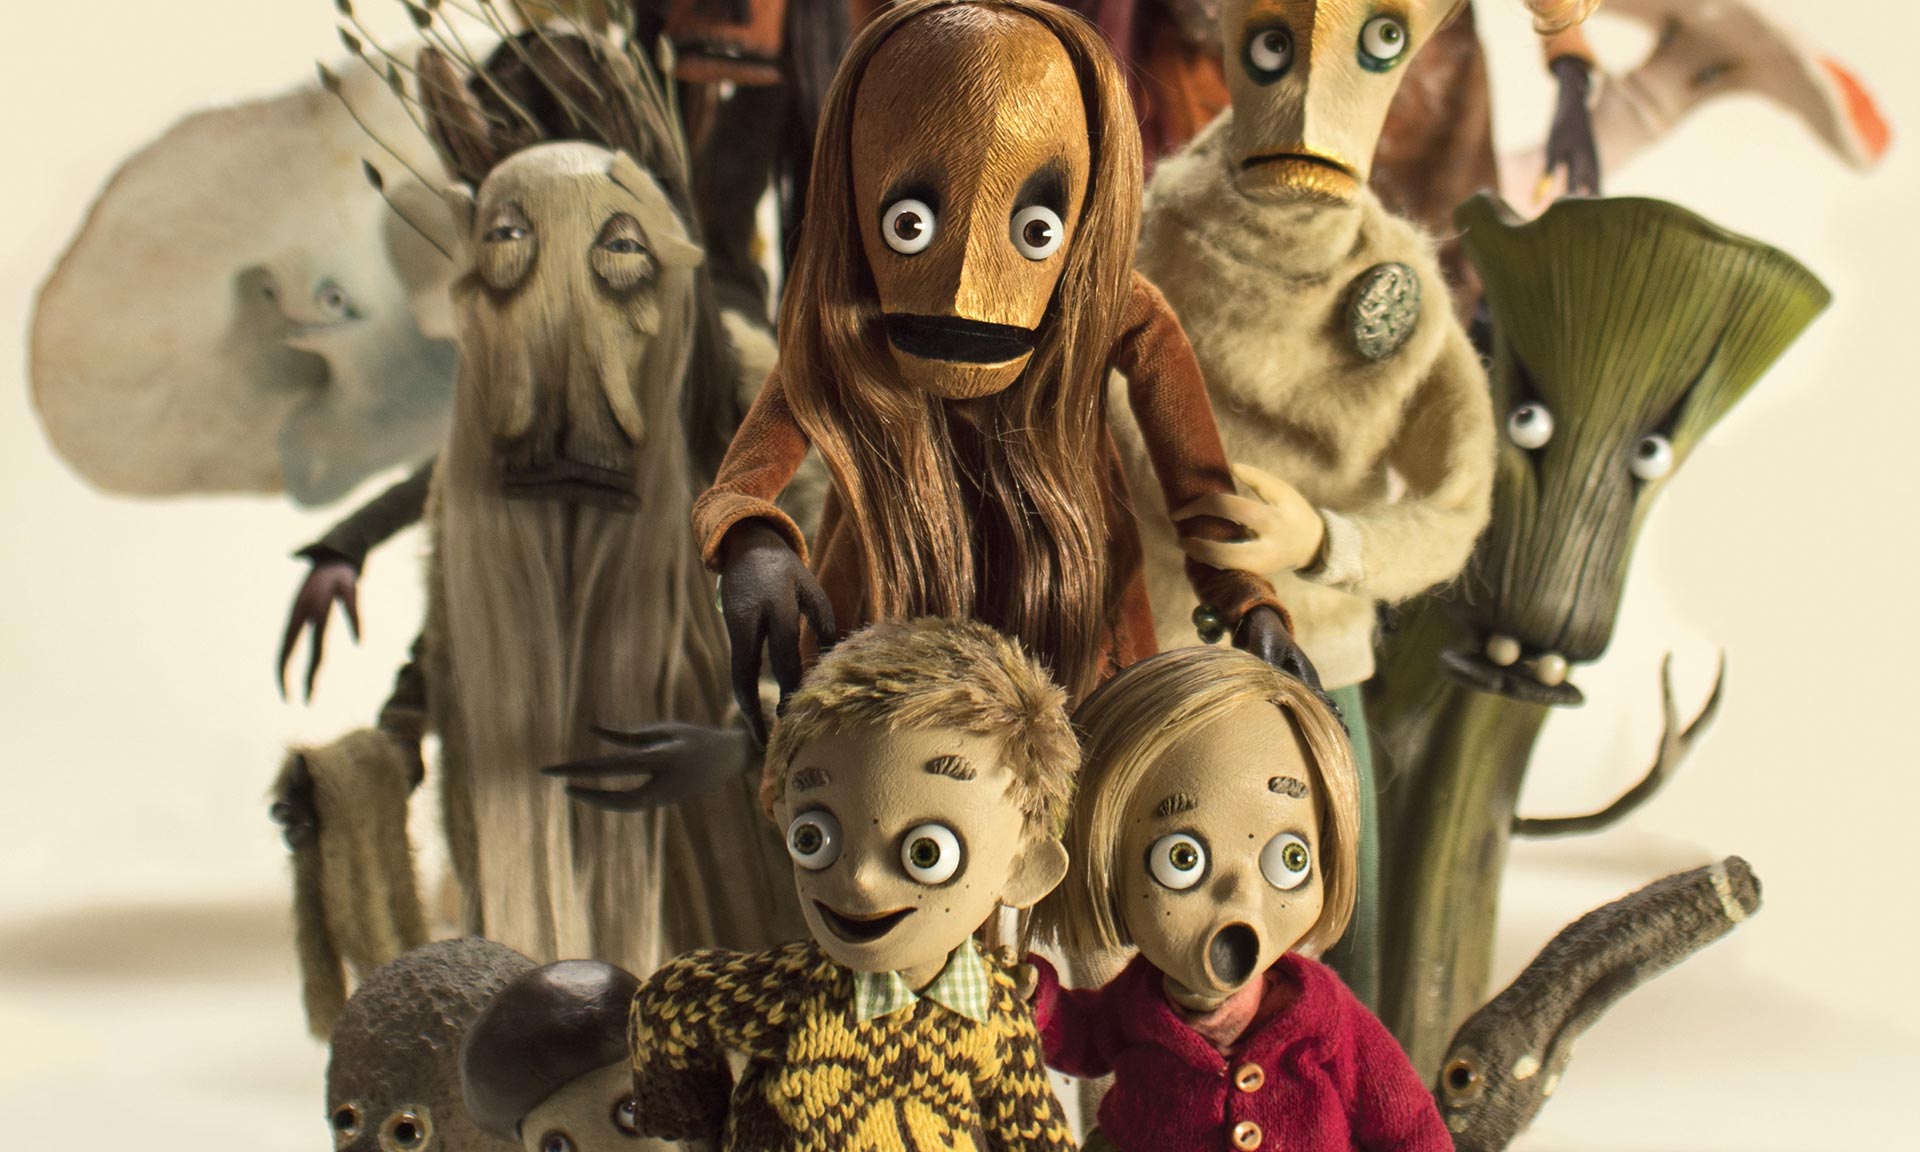 Exhibition brings Czech animation to life - Czech & Slovak Leaders